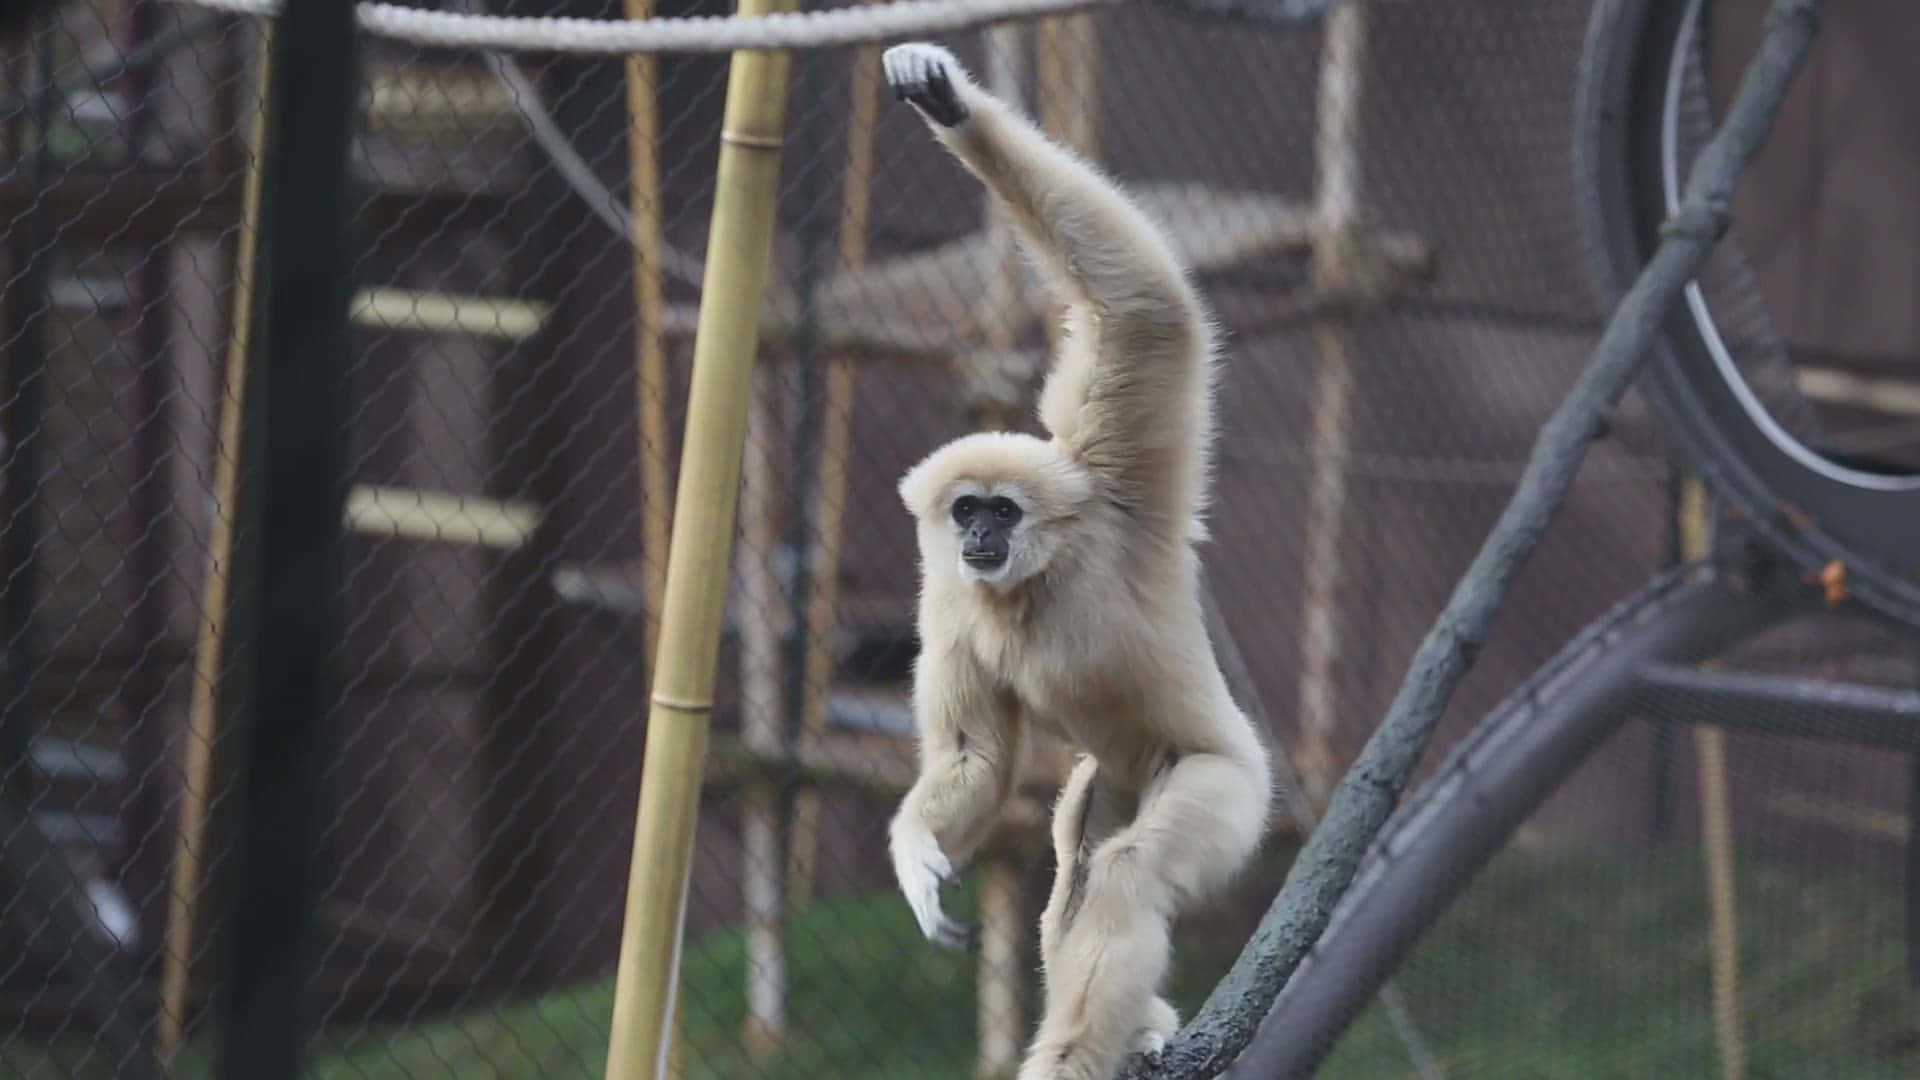 A White Monkey Is Hanging On A Rope In An Enclosure